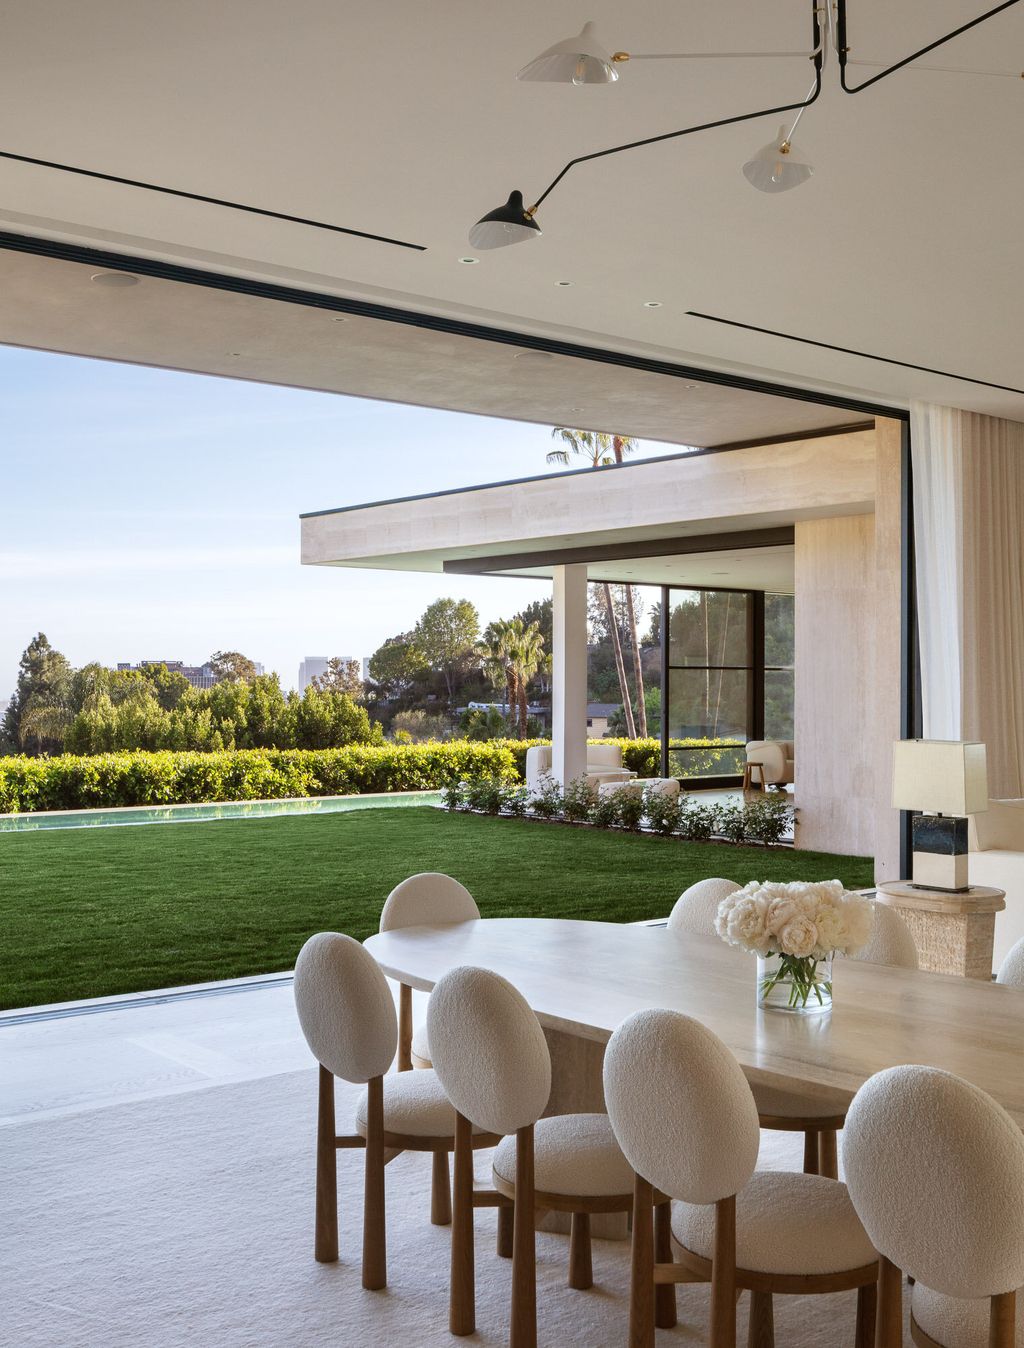 The Modern Mansion in Los Angeles is a warm sophisticated modern home nestled on an acre of land surrounded by lush landscape overlooking LA city now available for sale.